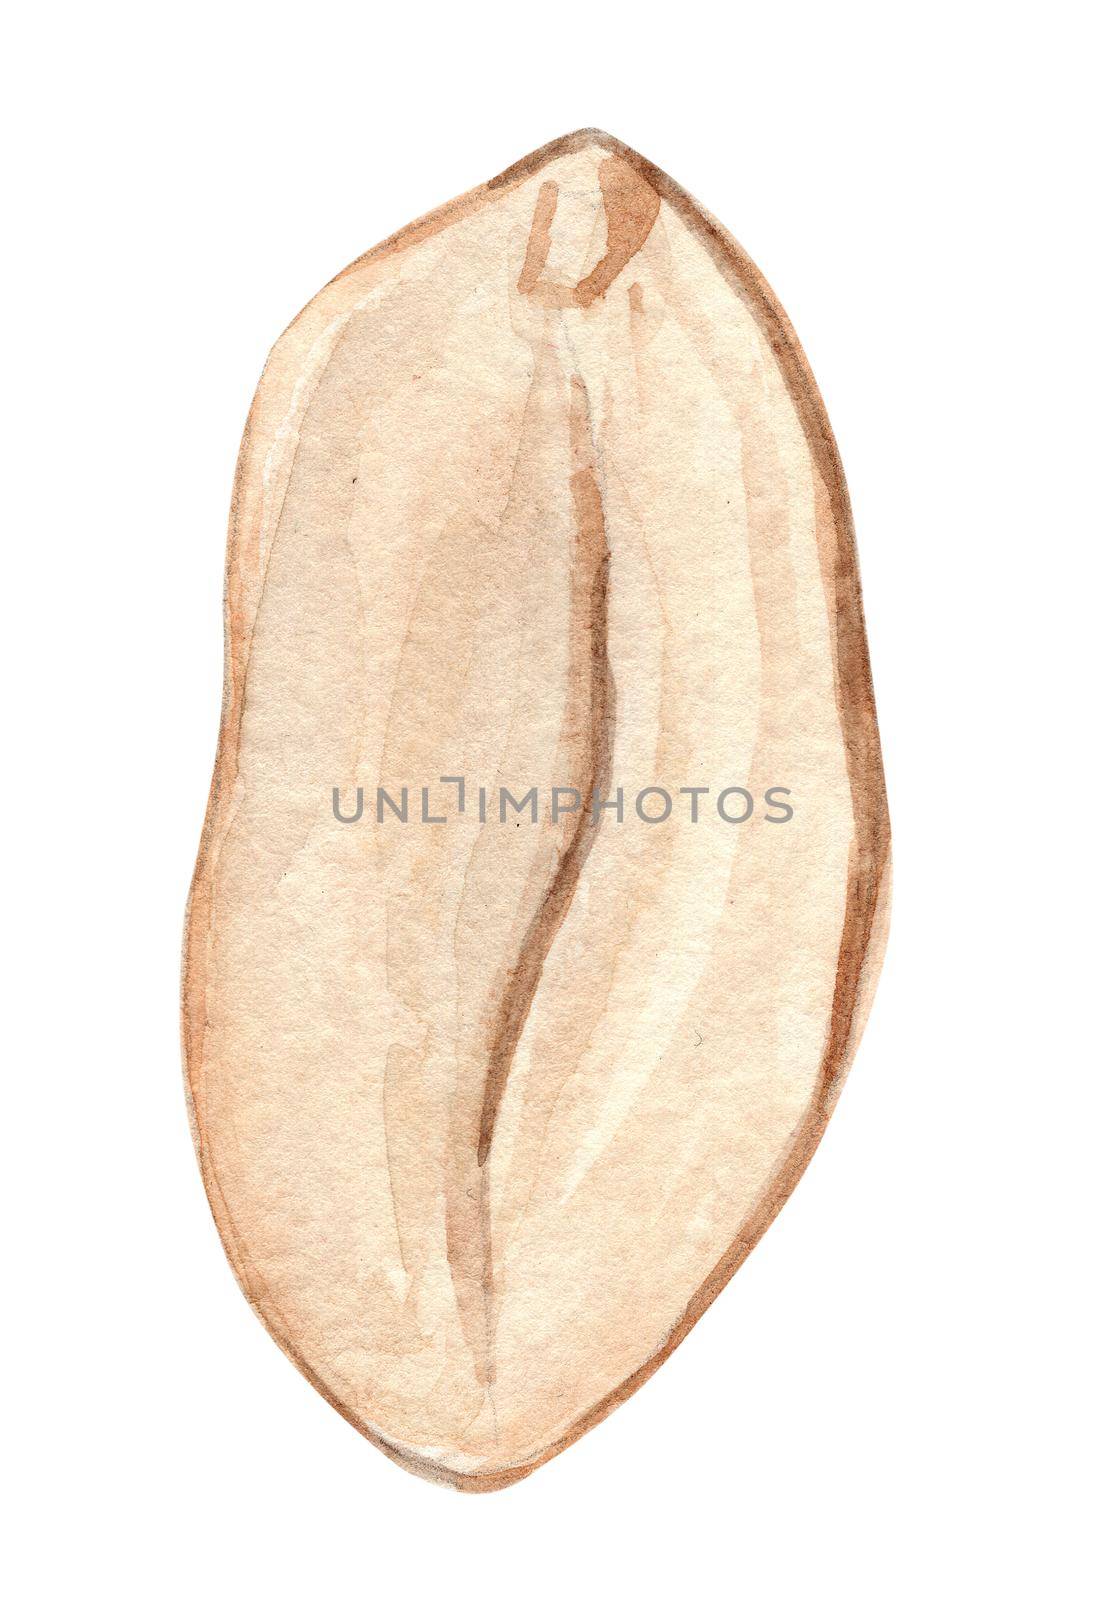 watercolor cut peanut isolated on white background